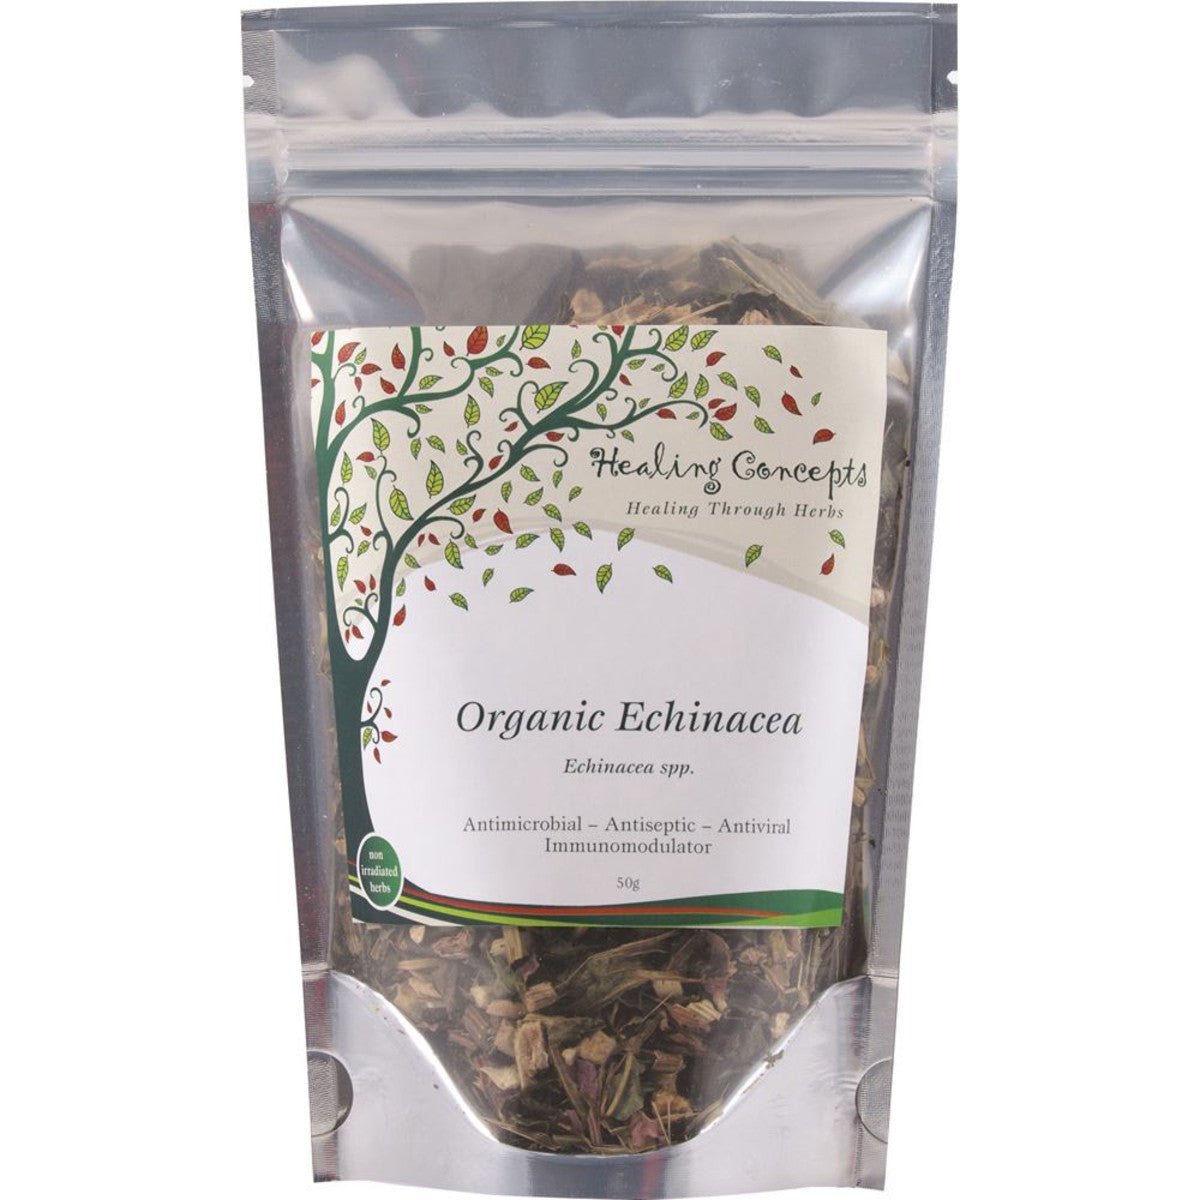 HEALING CONCEPTS Organic Echinacea 50g - Dr Earth - Drinks